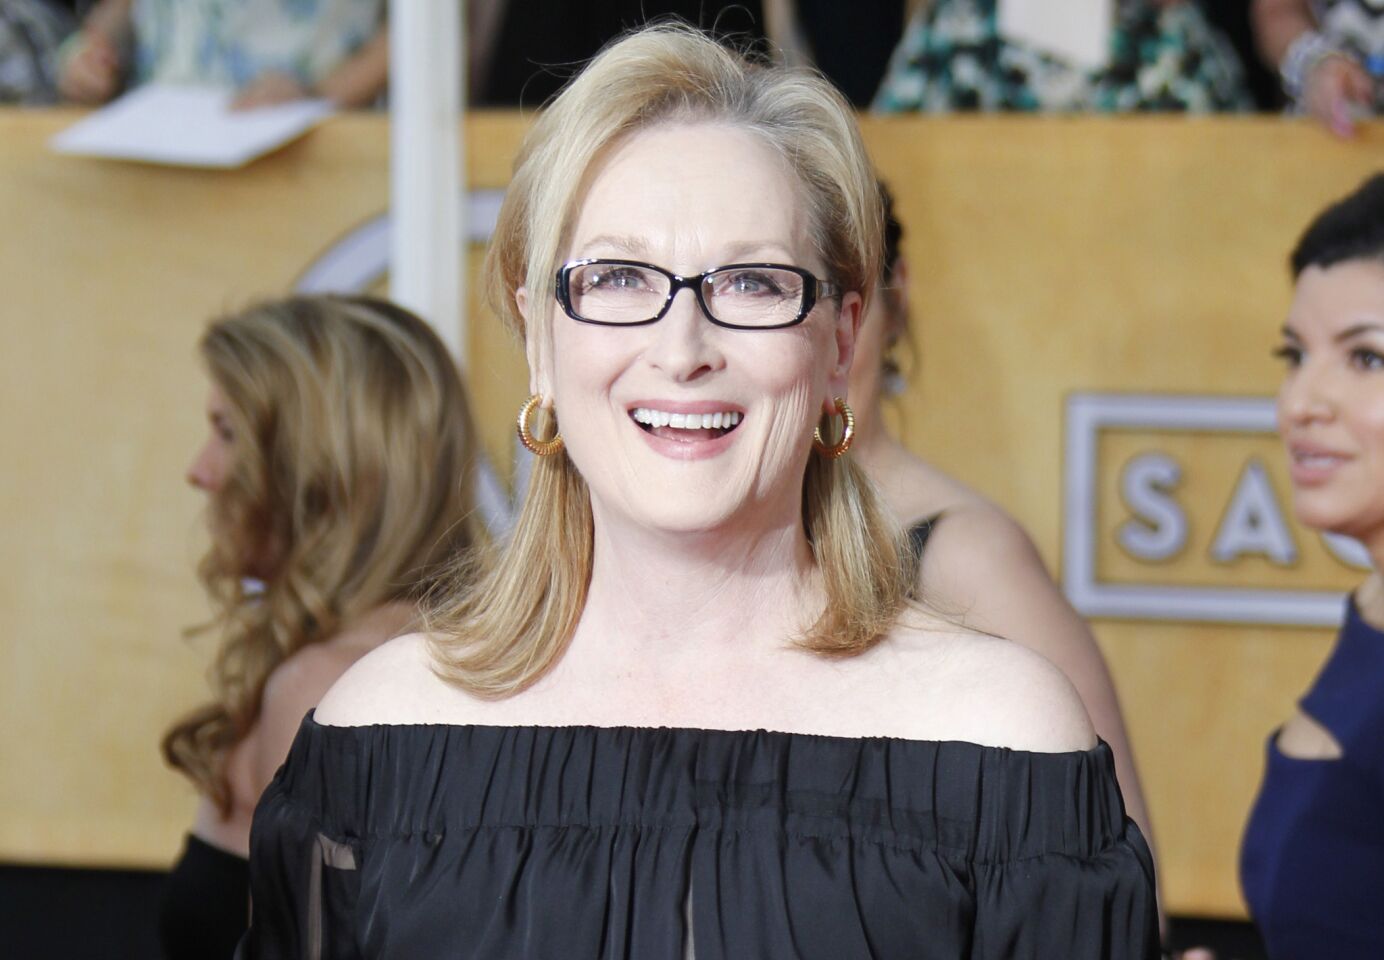 Meryl Streep, who made her film debut in the 1977 best picture nominee "Julia," has become virtually synonymous with the Academy Awards. But her nominated roles are just part of her long and storied film career, as the following photos show.